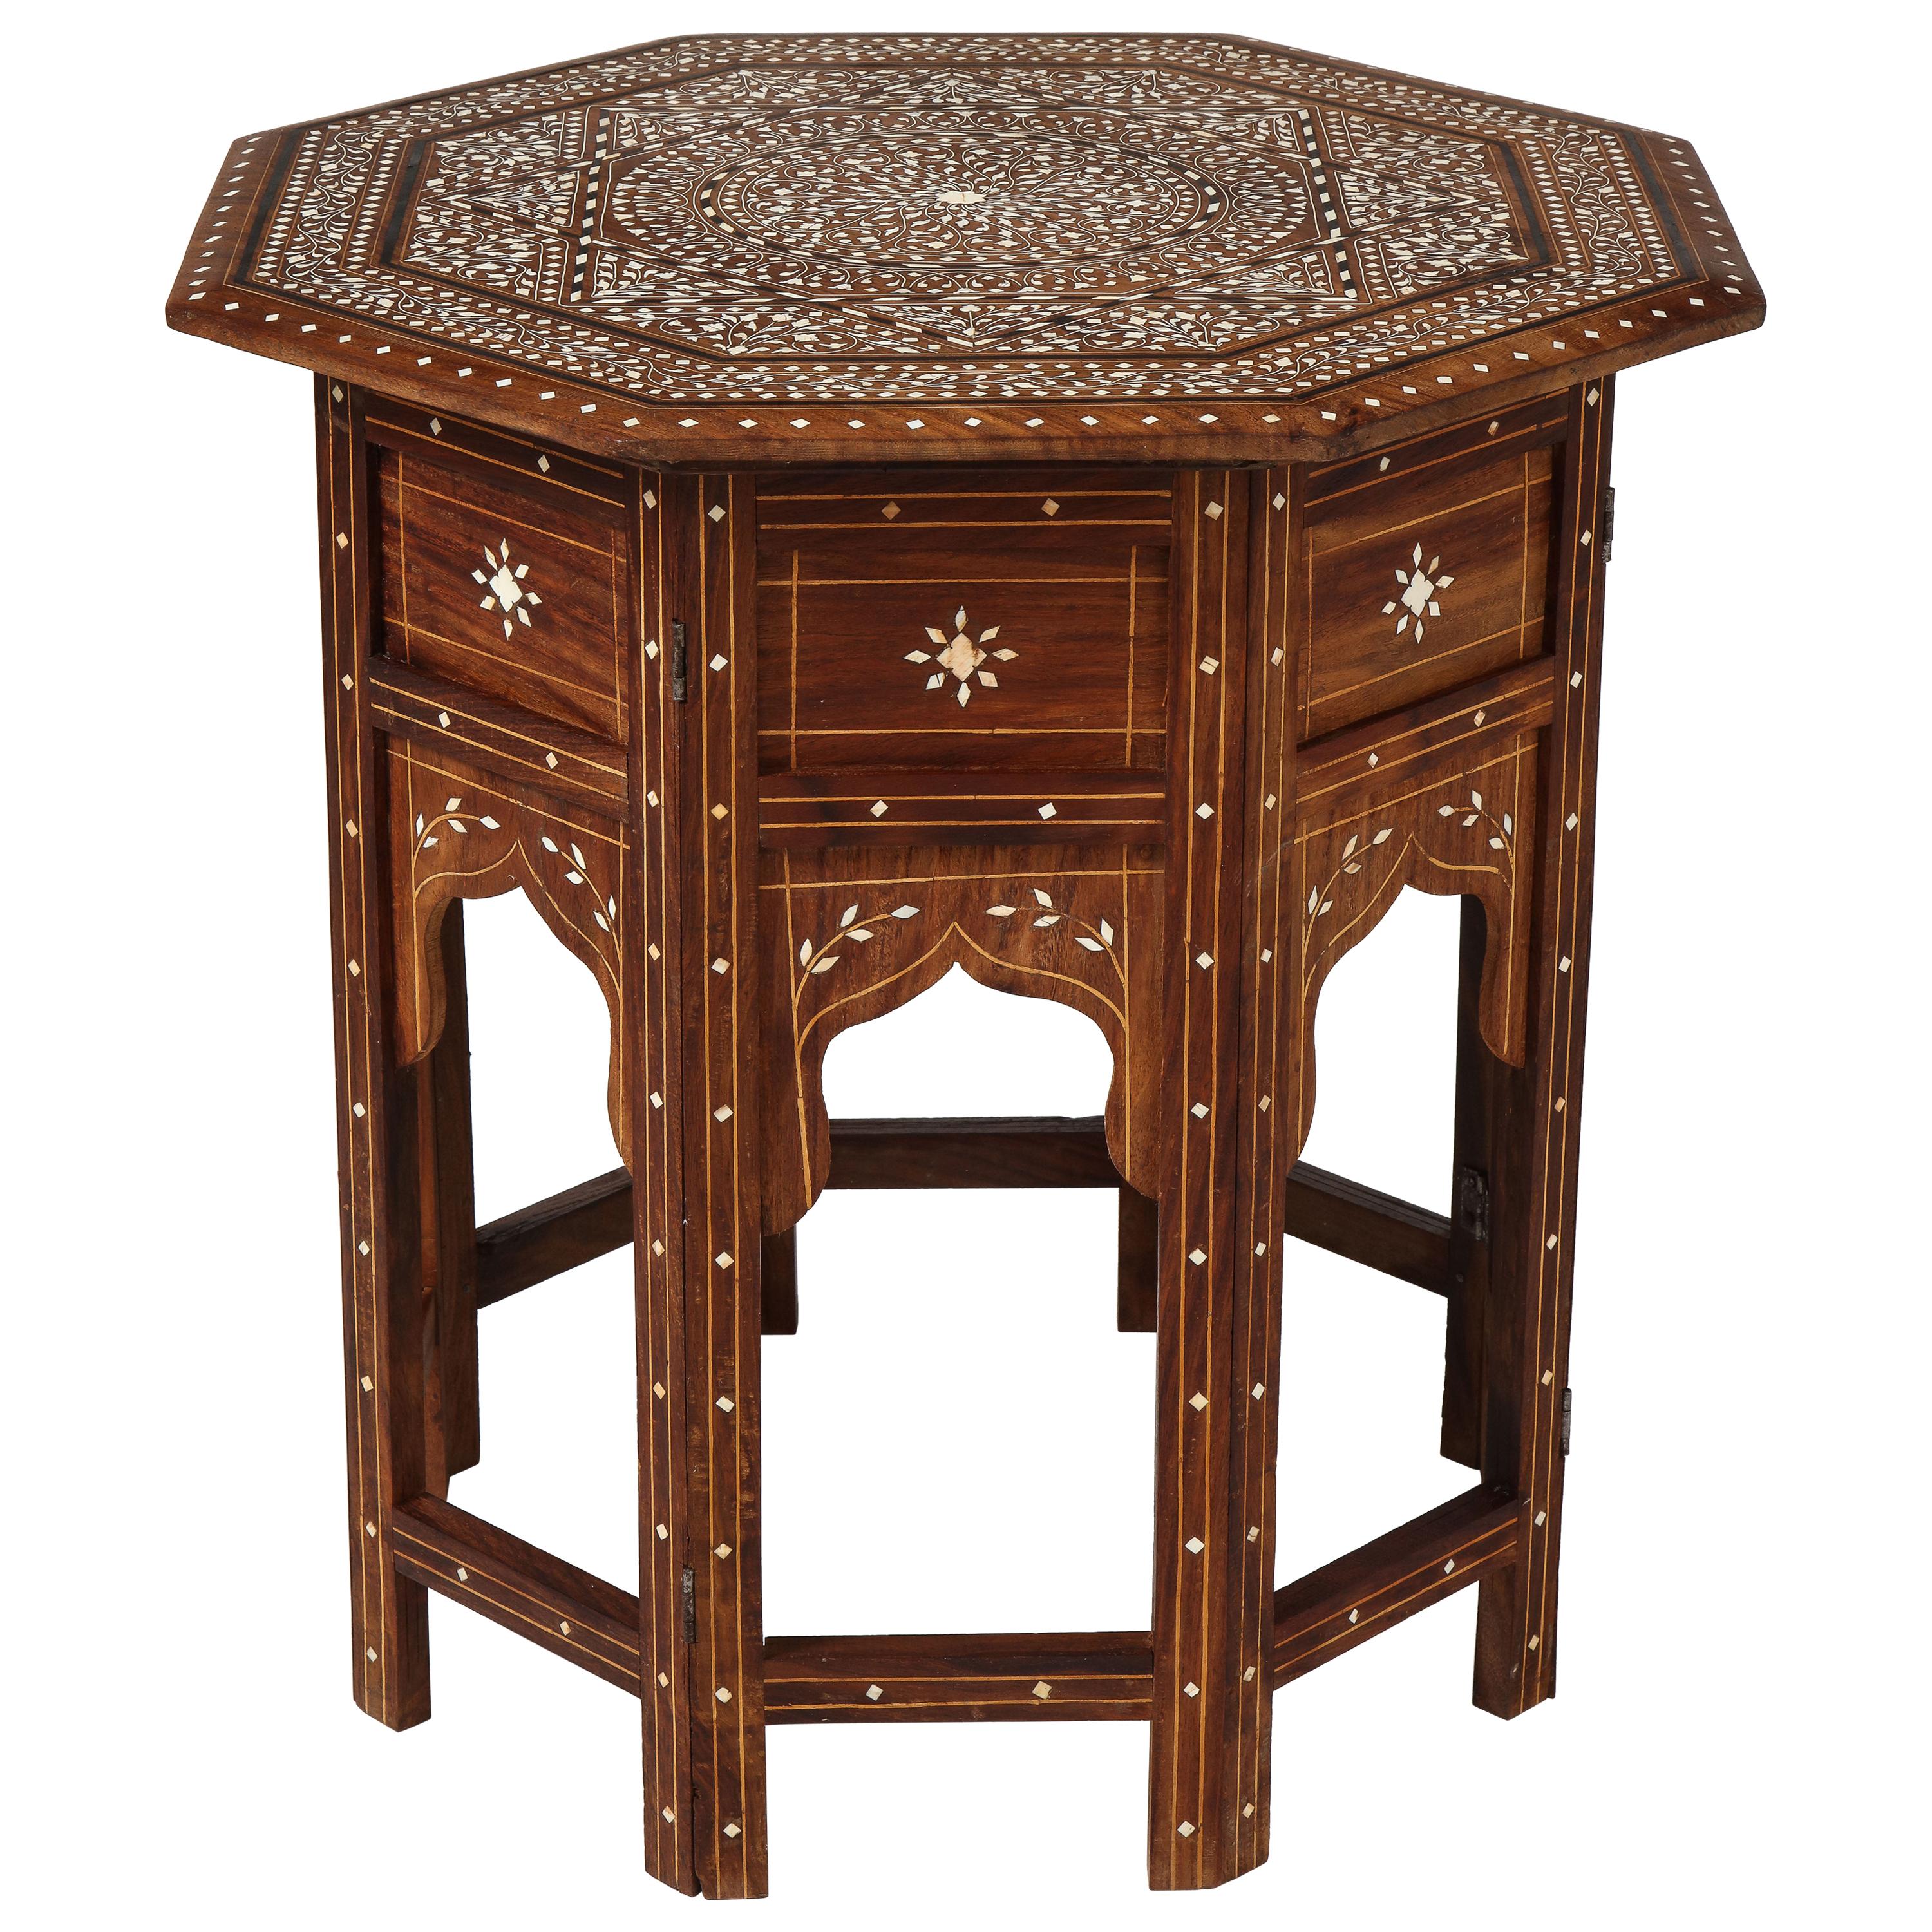 Anglo-Indian Inlaid Octagonal Folding Tea Table